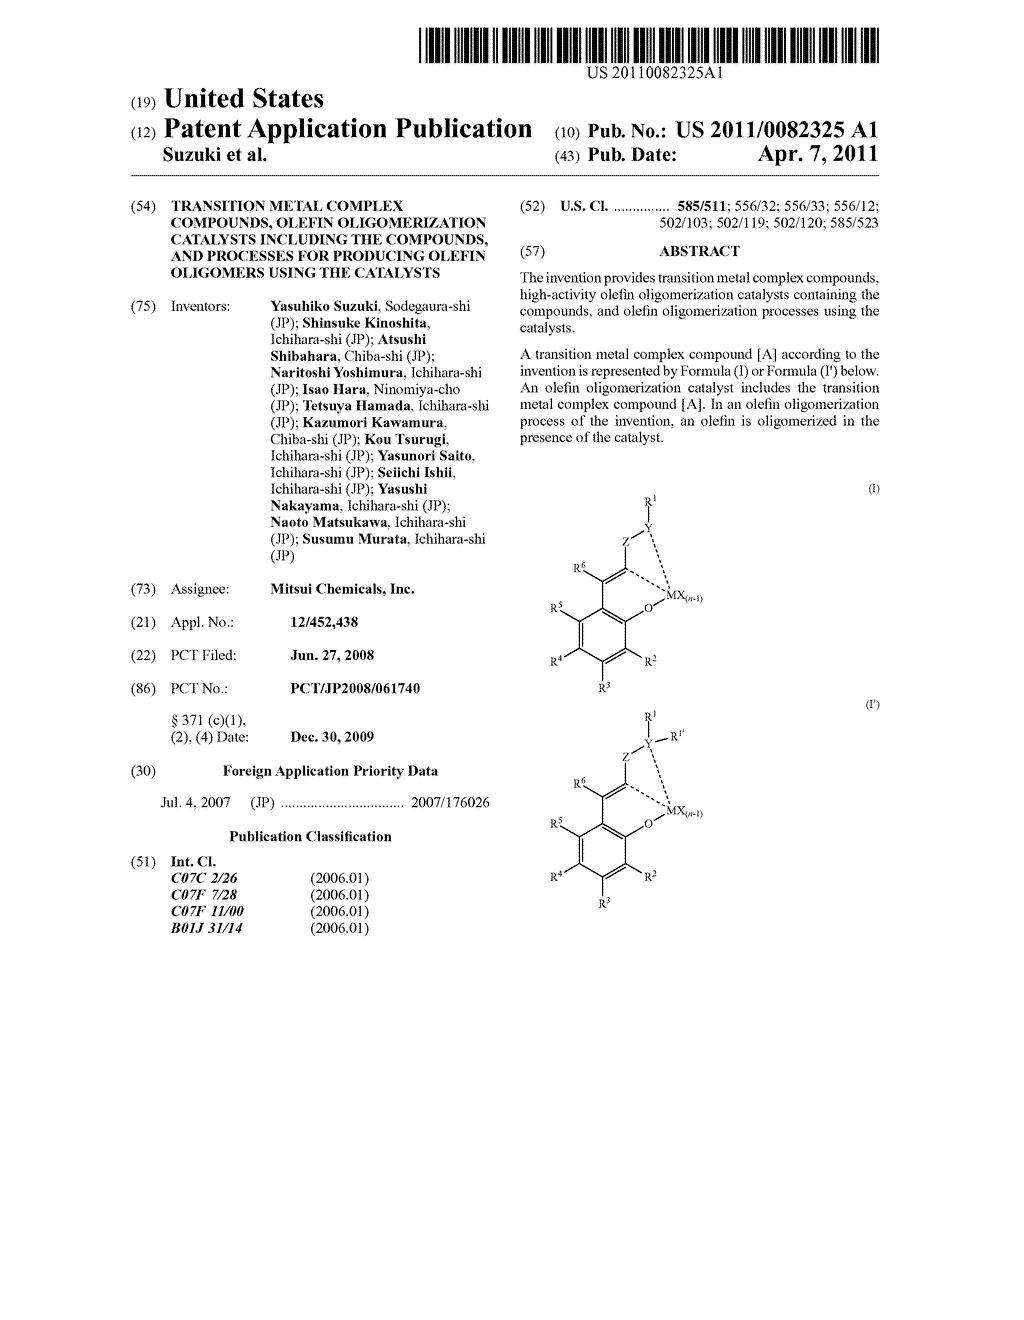 TRANSITION METAL COMPLEX COMPOUNDS, OLEFIN OLIGOMERIZATION CATALYSTS INCLUDING THE COMPOUNDS, AND PROCESSES FOR PRODUCING OLEFIN OLIGOMERS USING THE CATALYSTS - diagram, schematic, and image 01